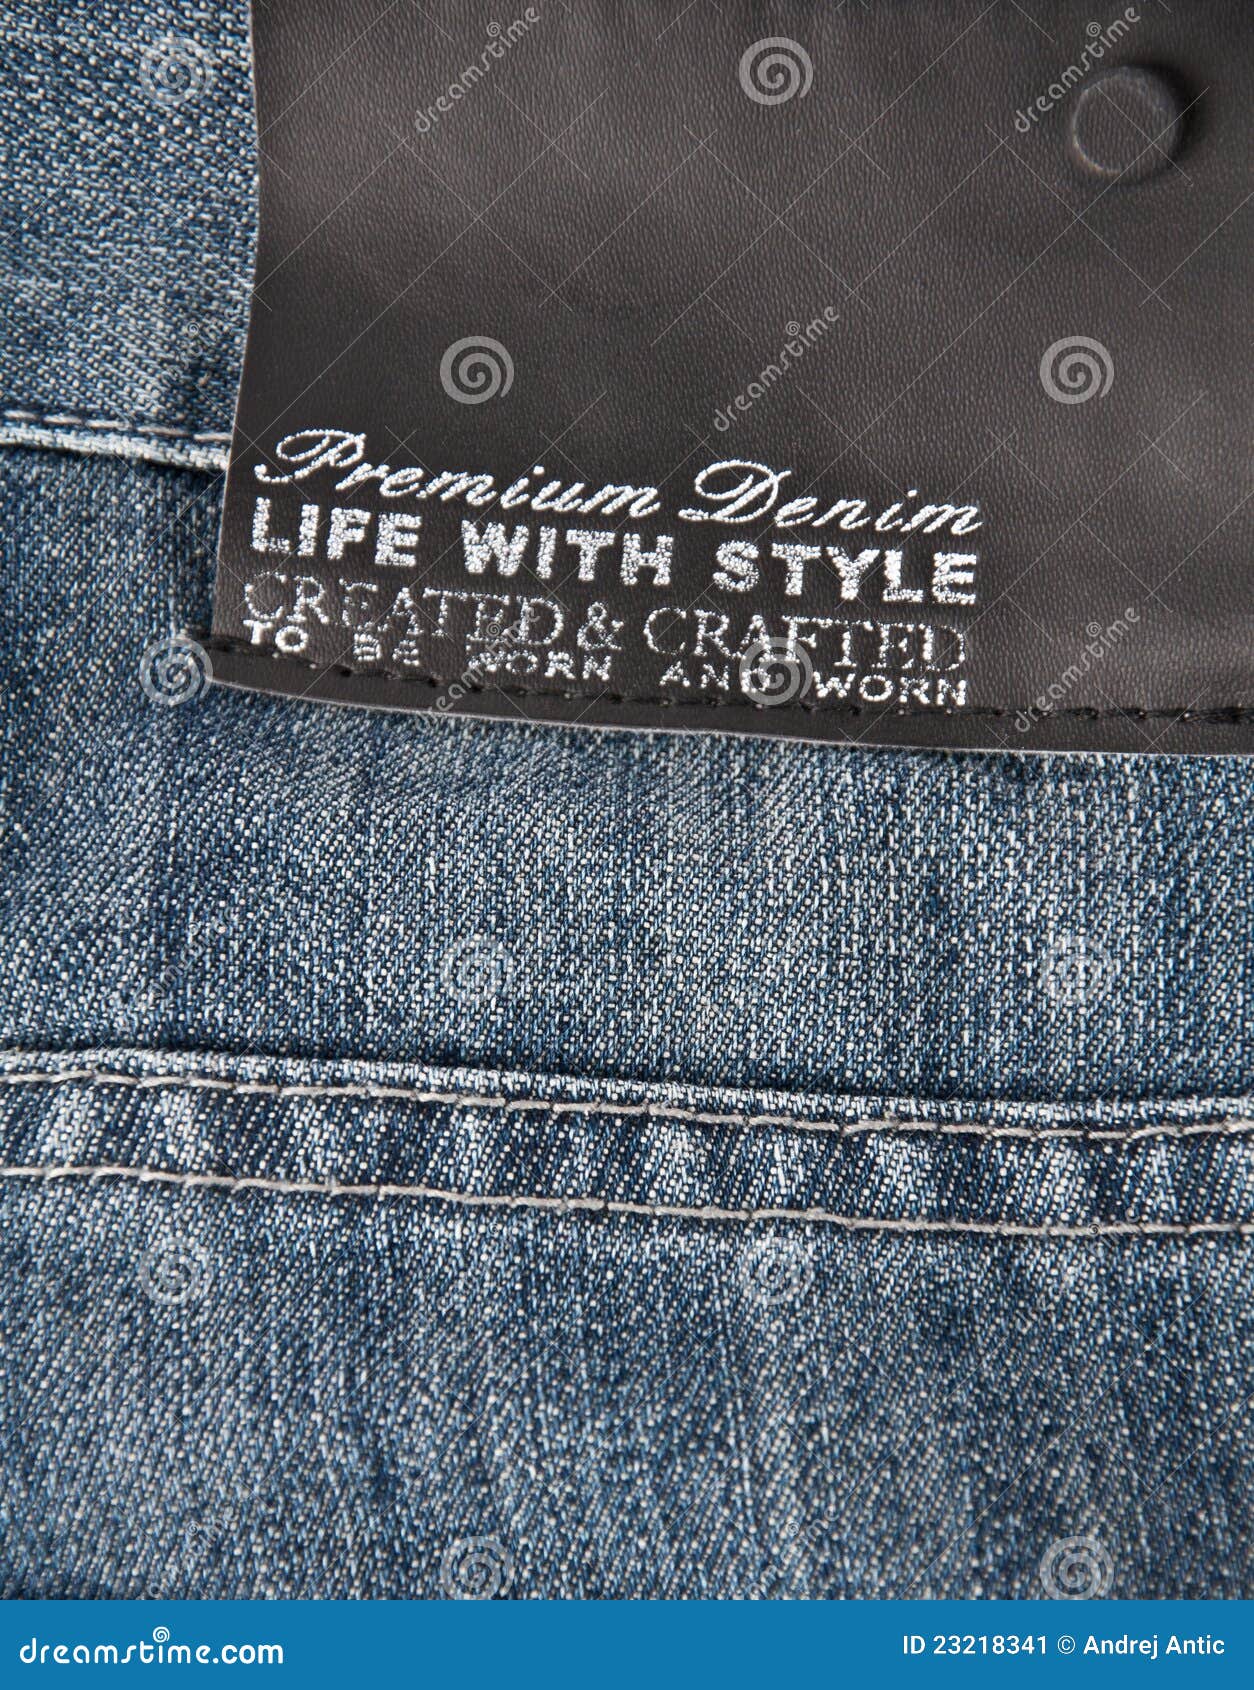 Jeans Texture With Black Label Stock Image - Image of closeup, empty ...